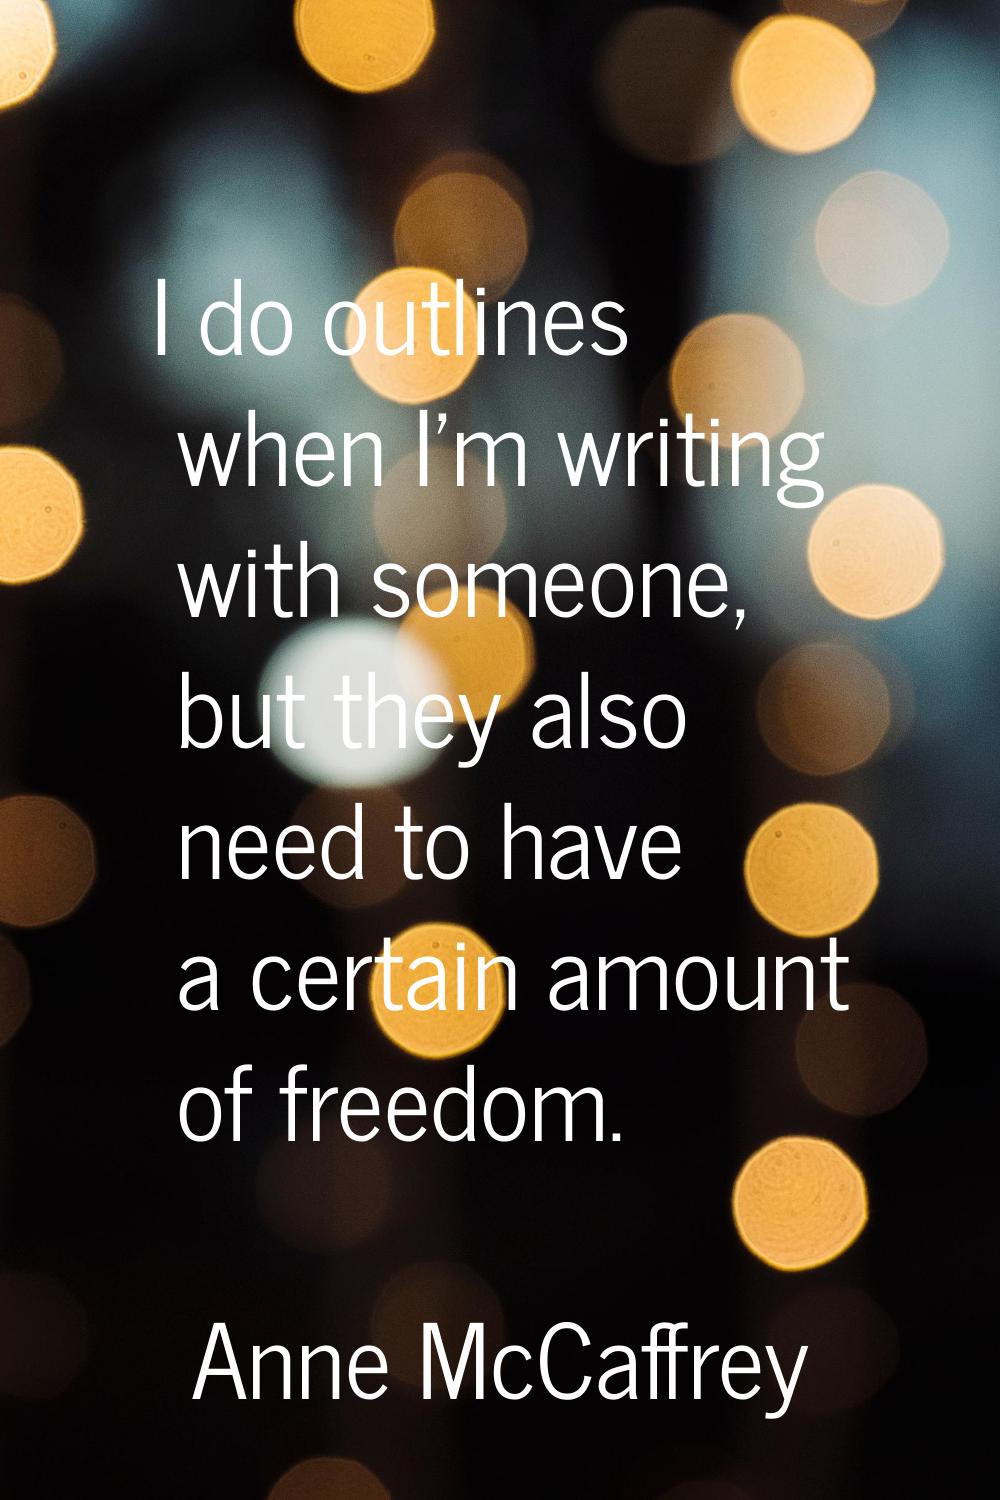 I do outlines when I'm writing with someone, but they also need to have a certain amount of freedom